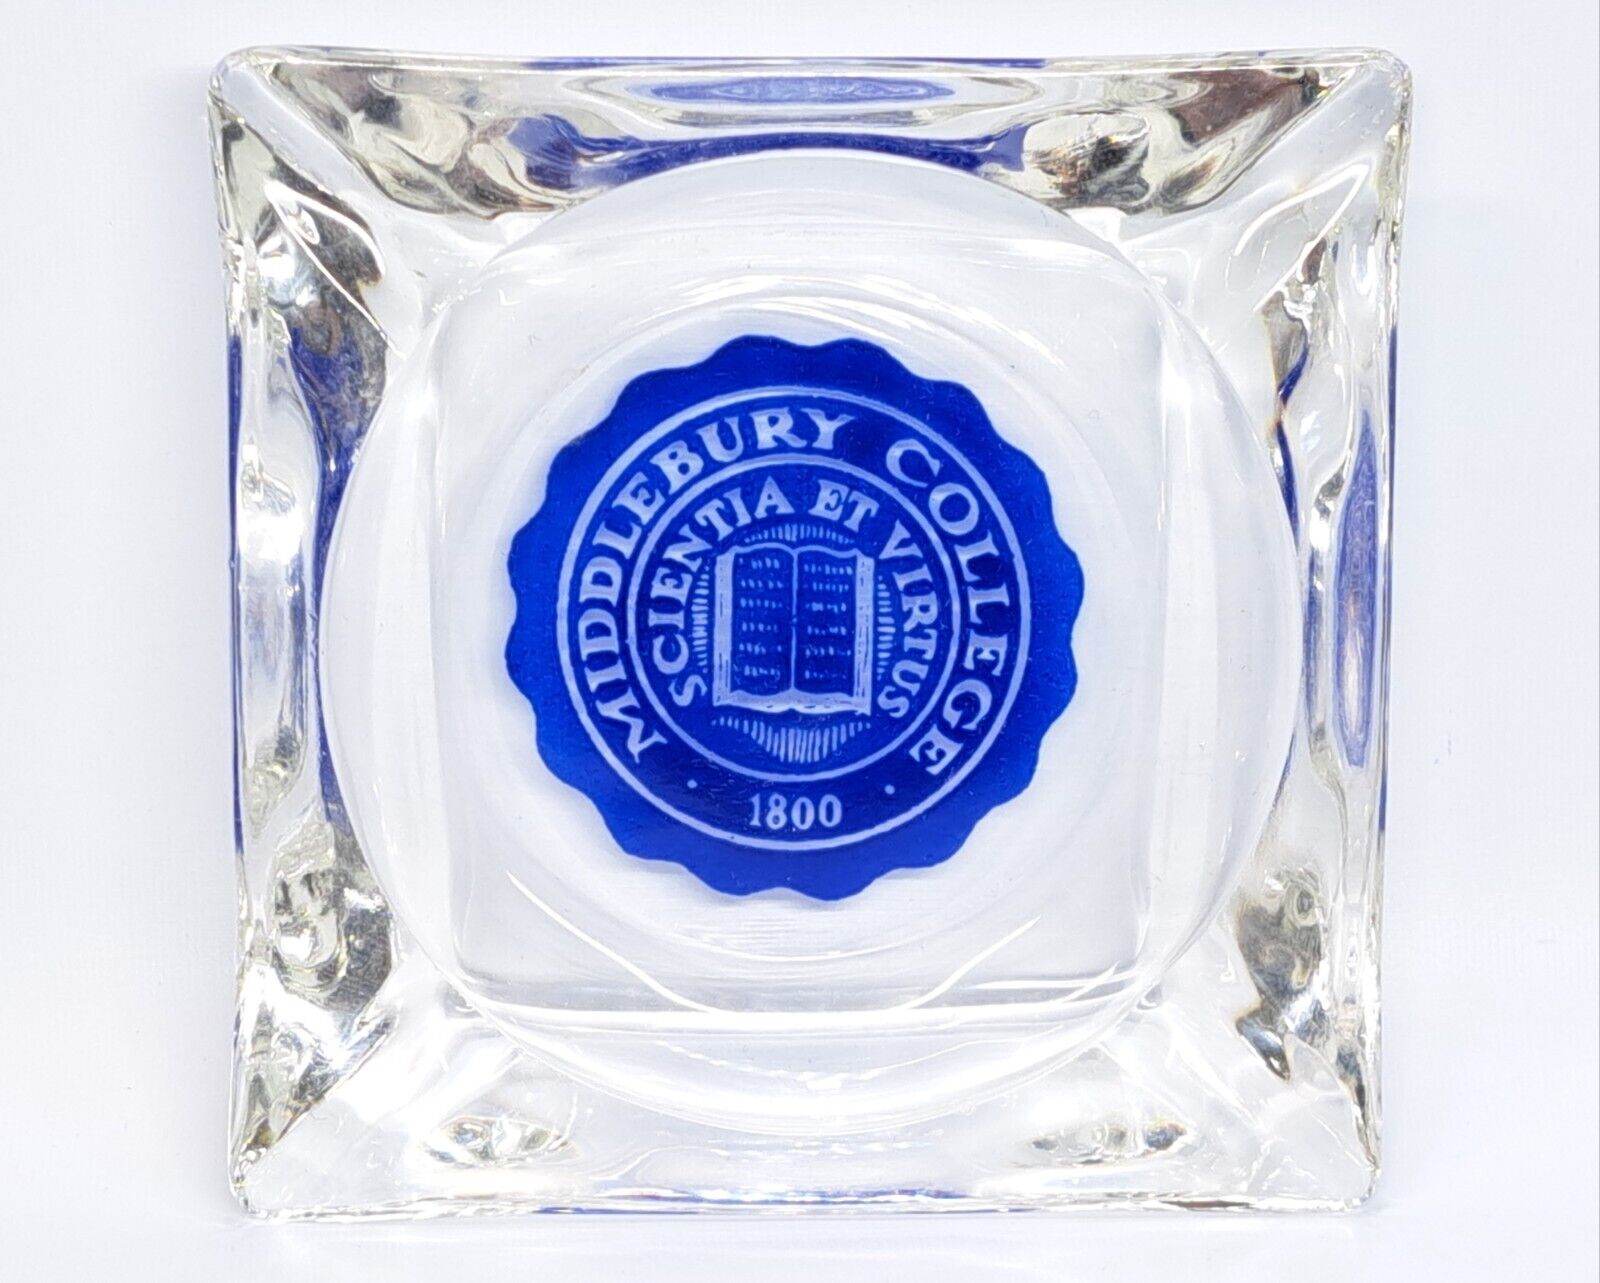 VINTAGE MIDDLEBURY COLLEGE VERMONT ADVERTISING ASHTRAY CLEAR GLASS APPLIED LABEL